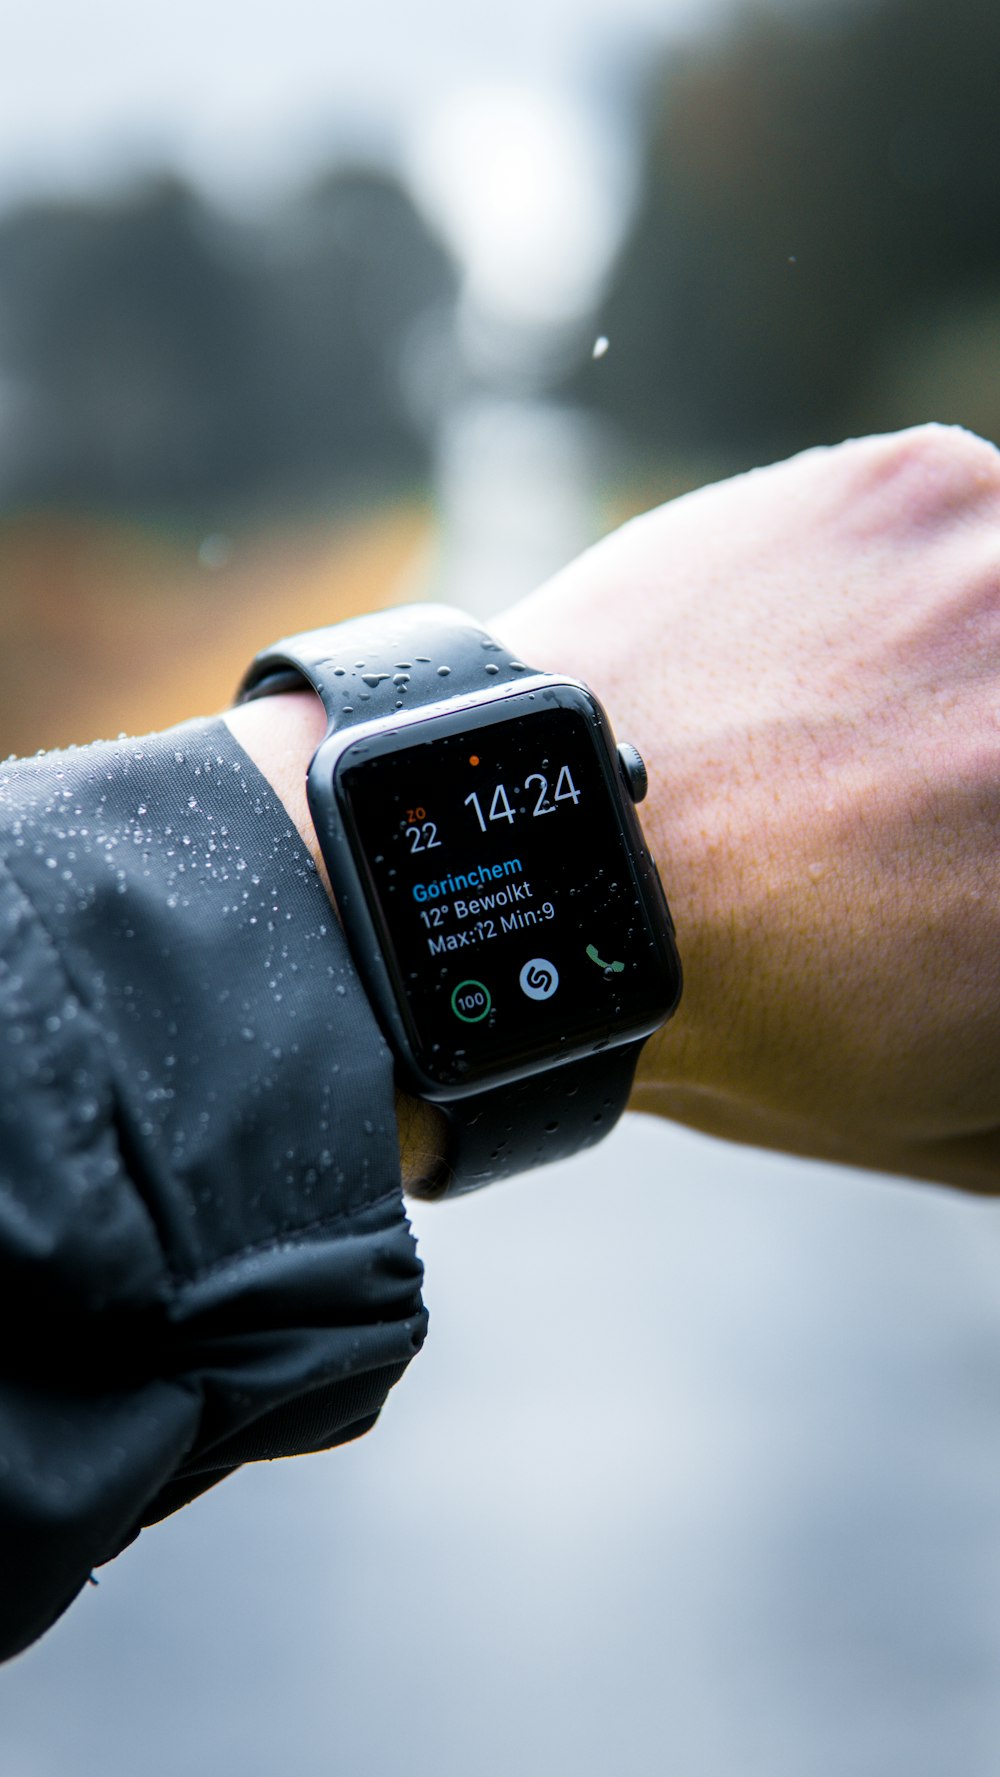 750+ Smartwatch Pictures | Download Free Images on Unsplash